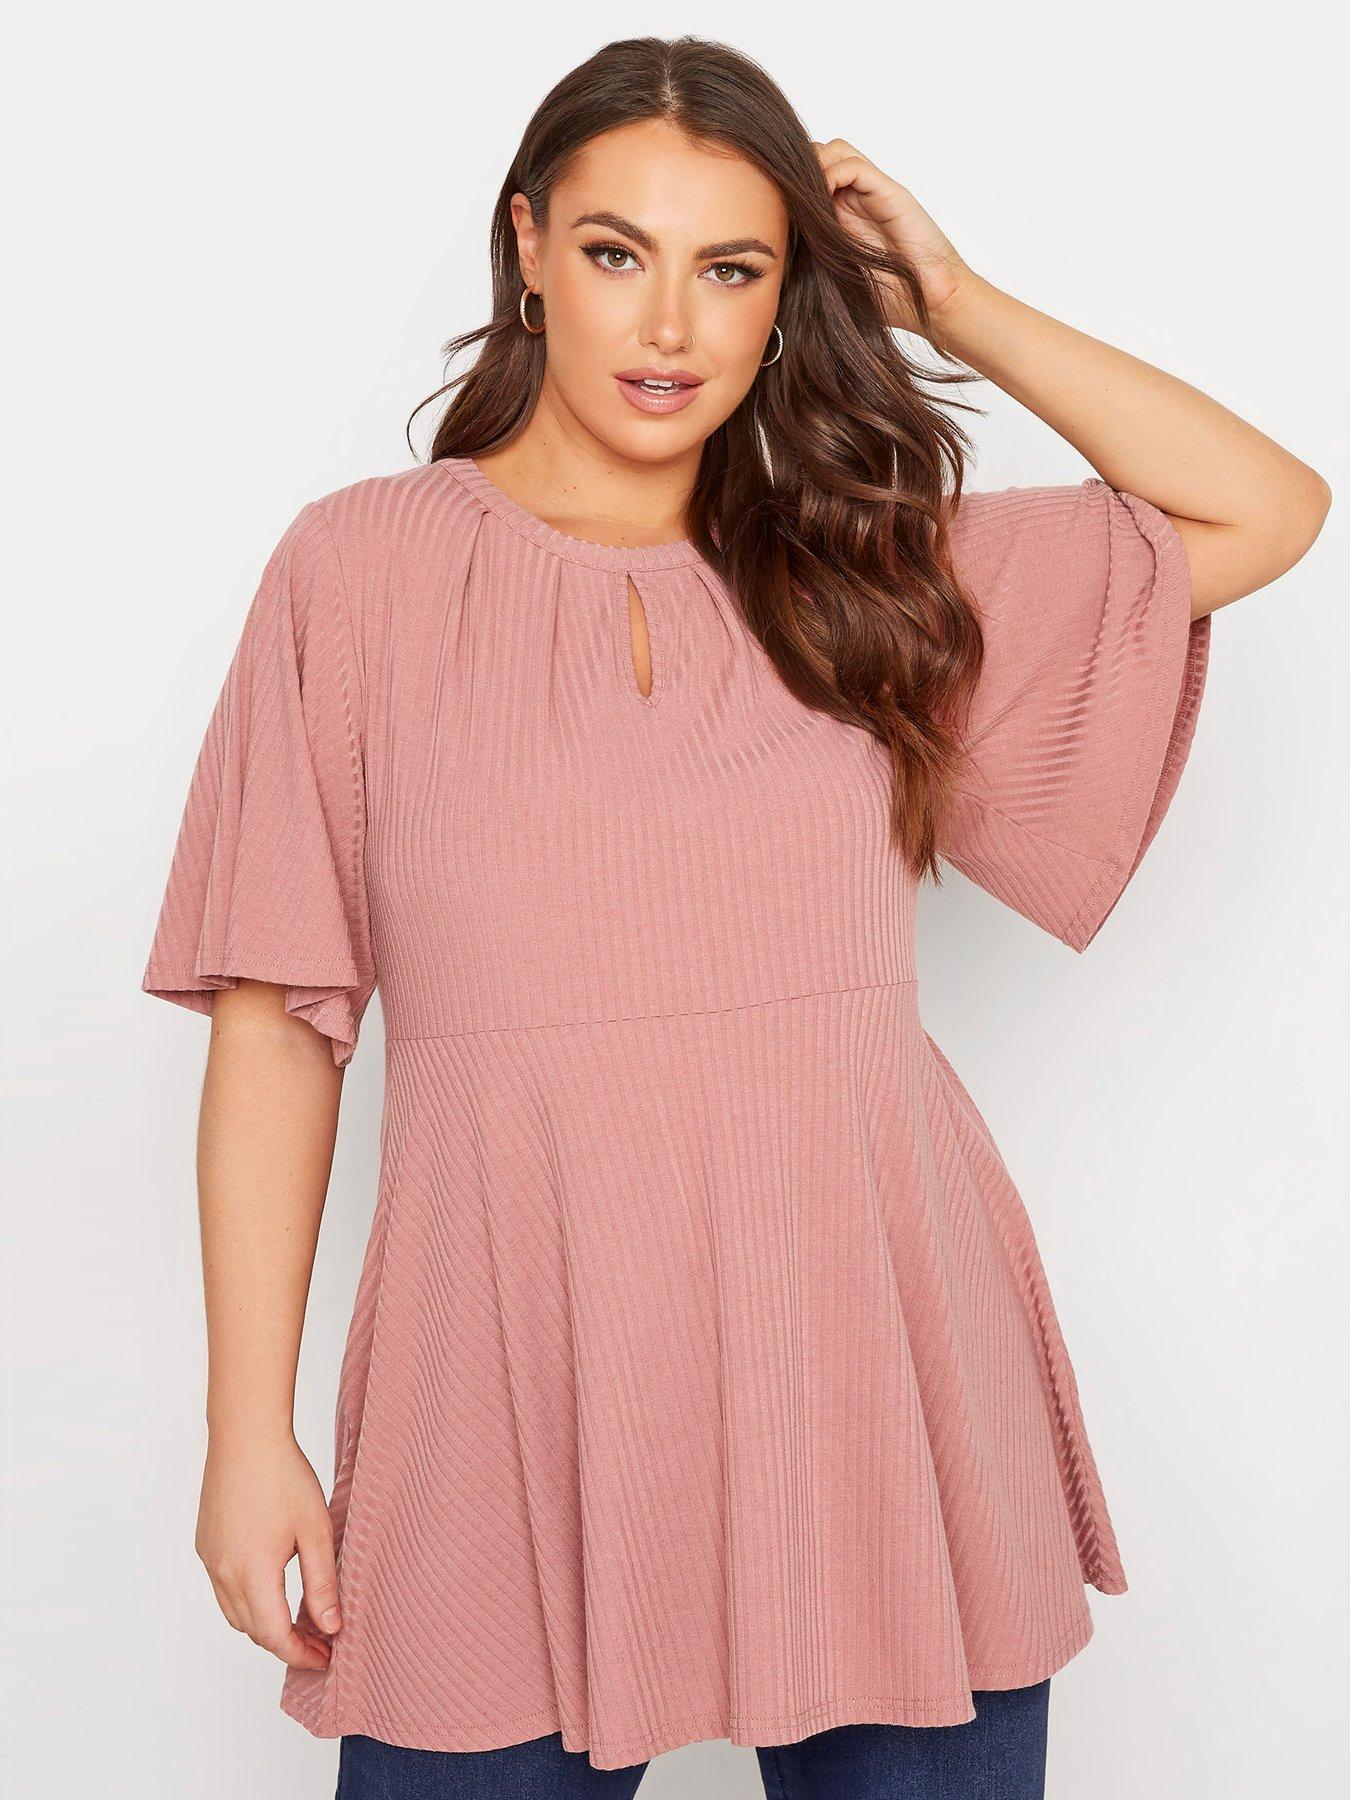  Yours Limited Keyhole Detail Rib Peplum Top - Dusky Pink